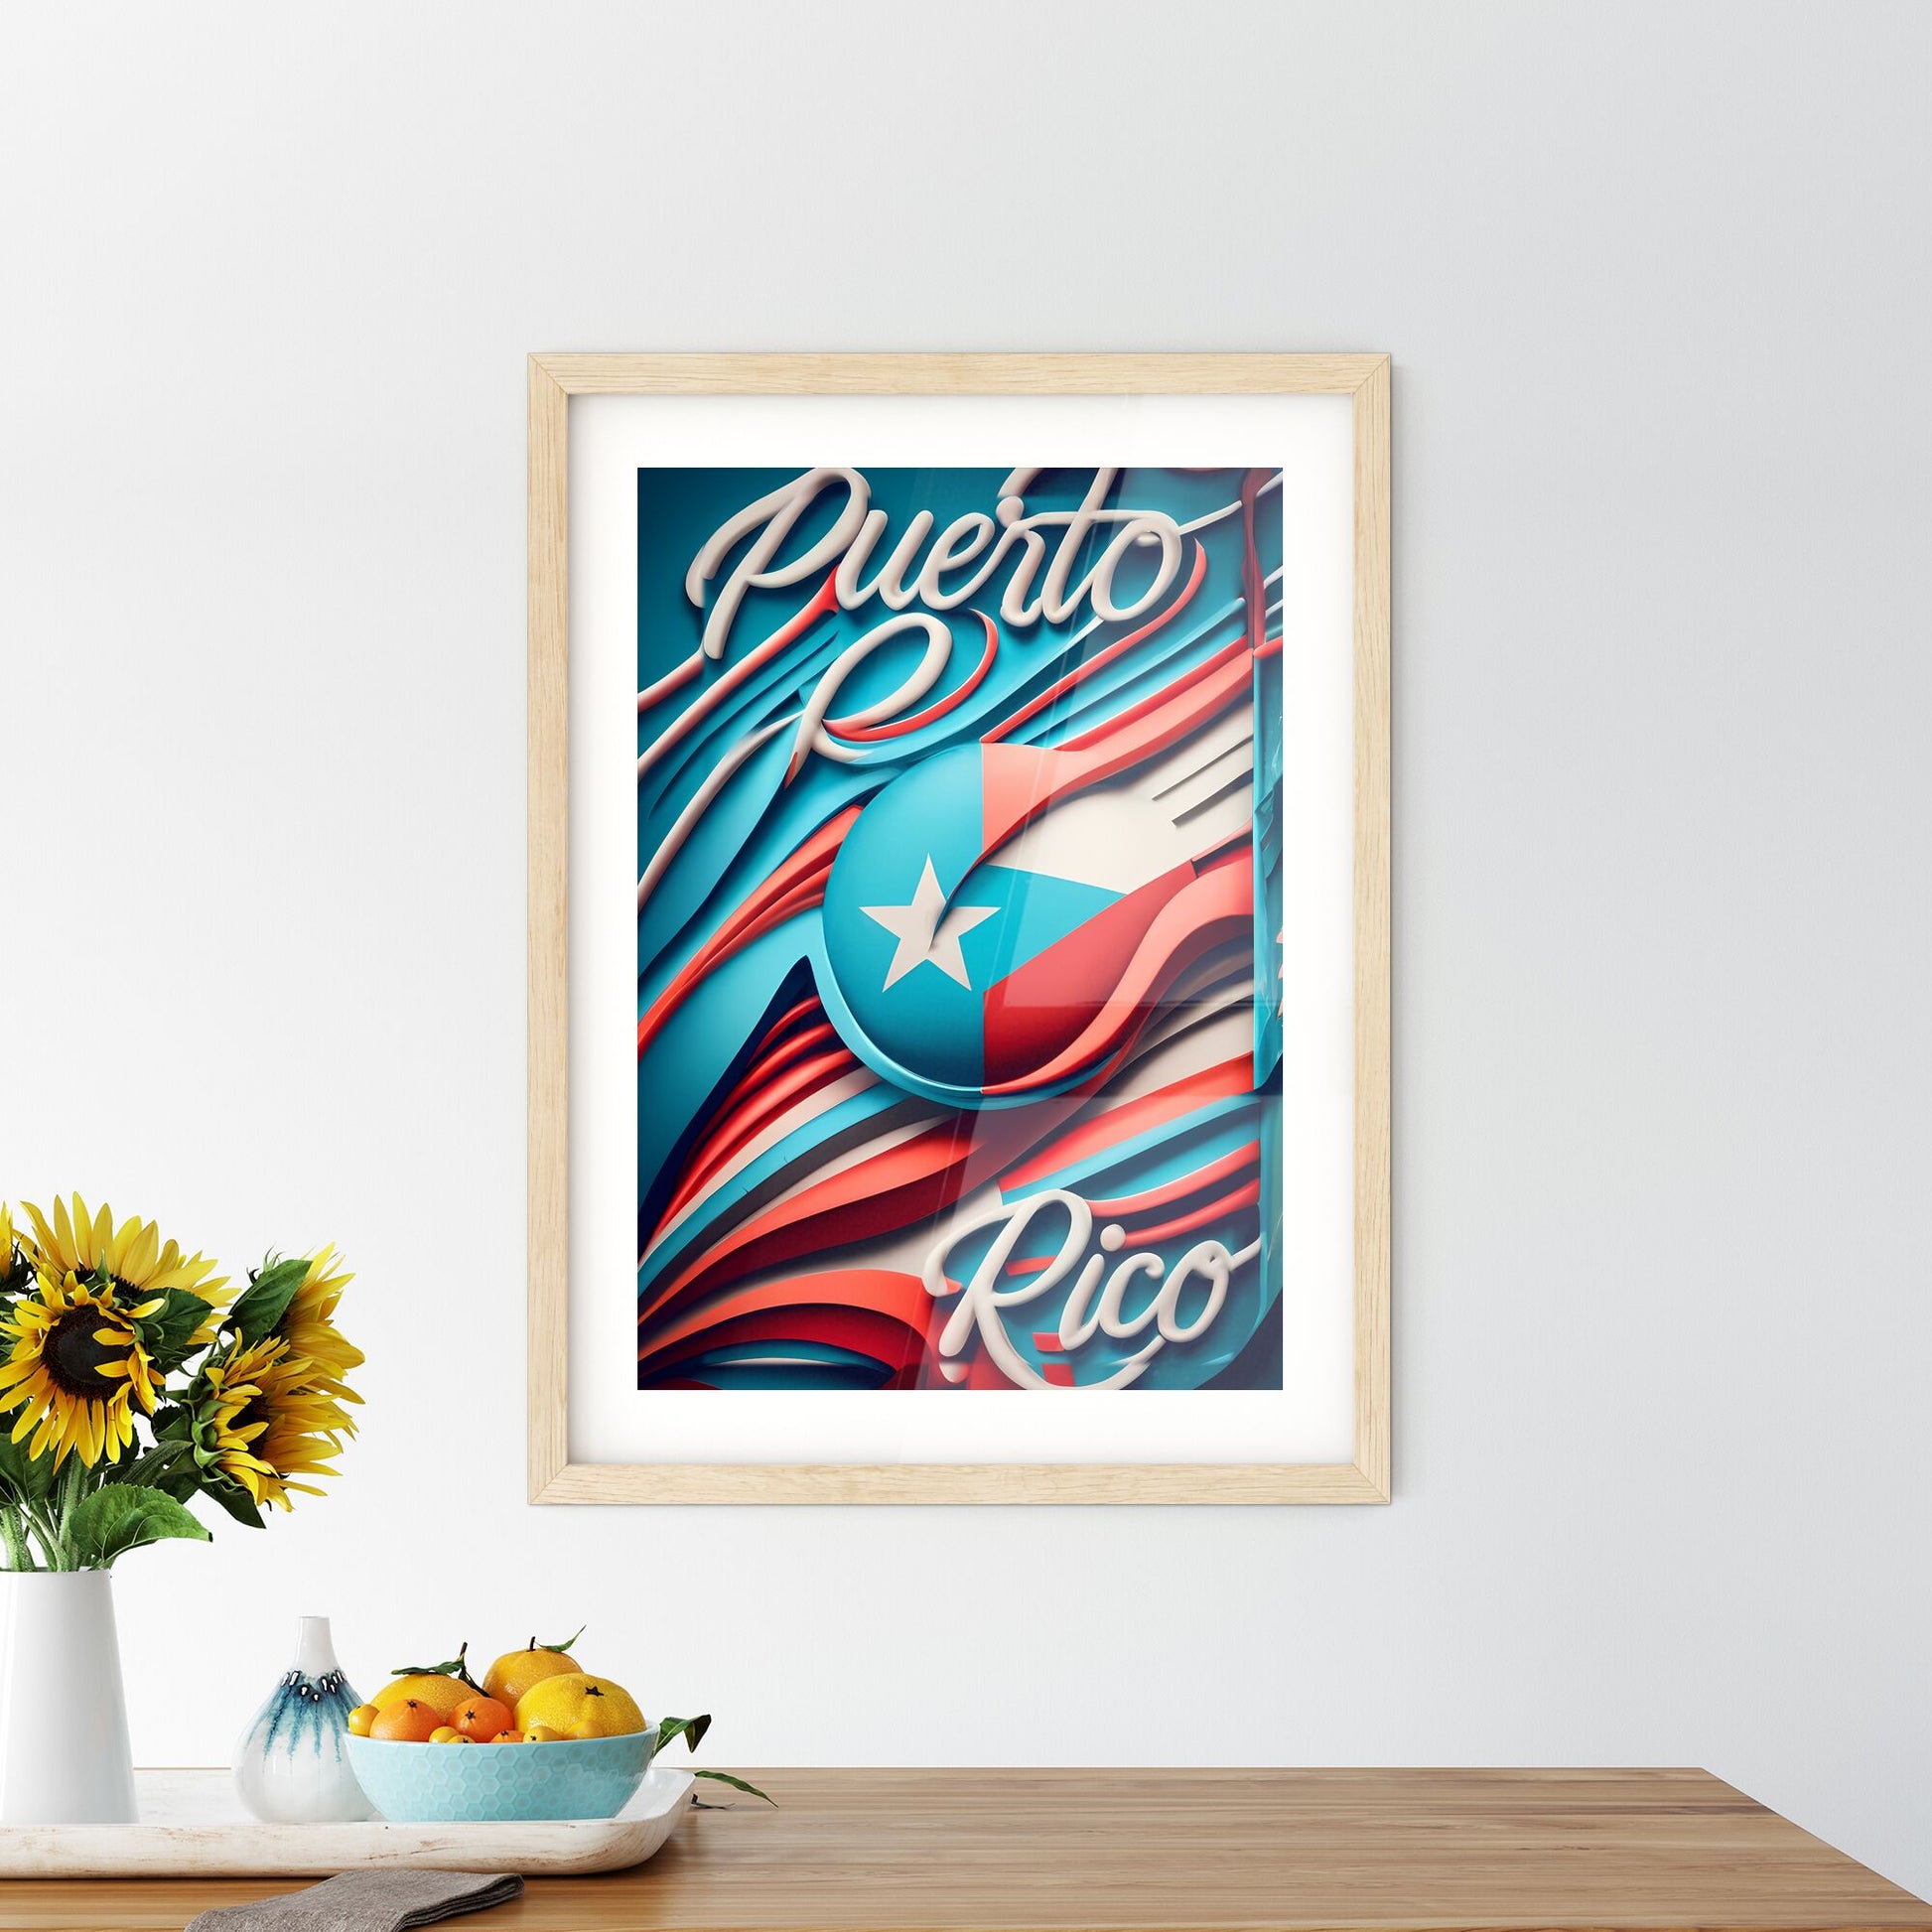 Puerto Rico - A Blue And Red Background With White Text Default Title